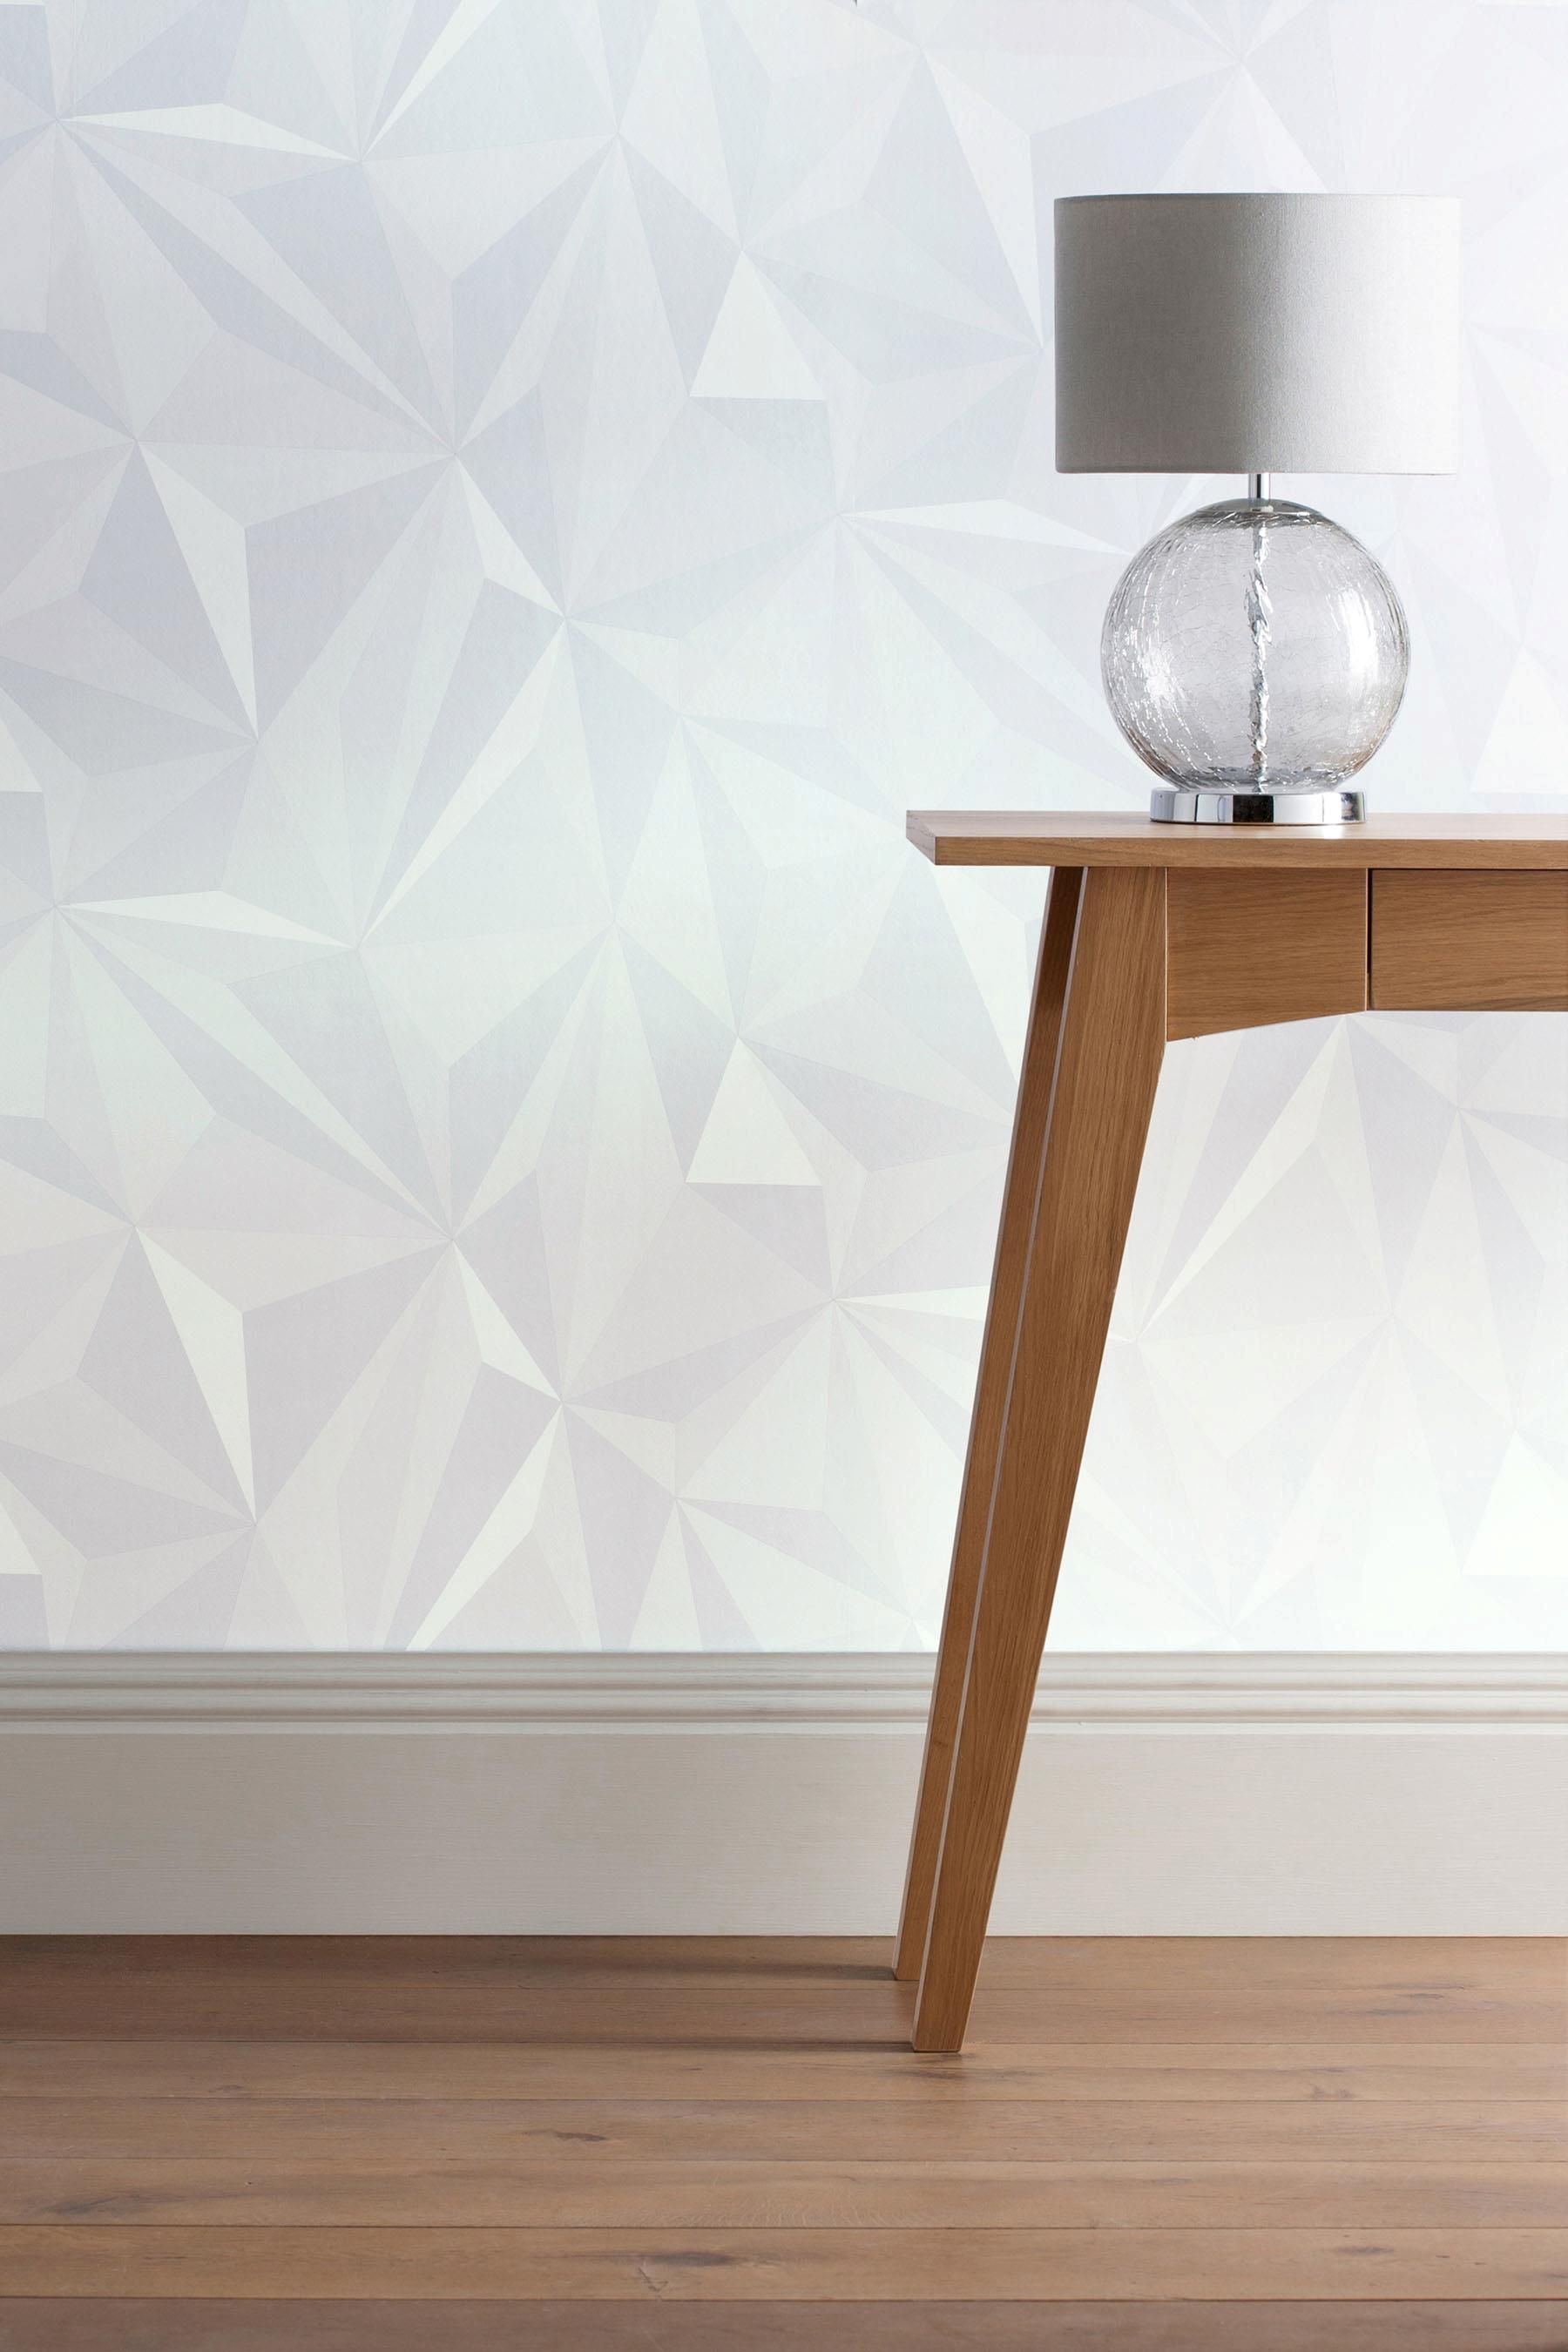 Buy Origami Effect Wallpaper From The Next Uk Online - Next White , HD Wallpaper & Backgrounds